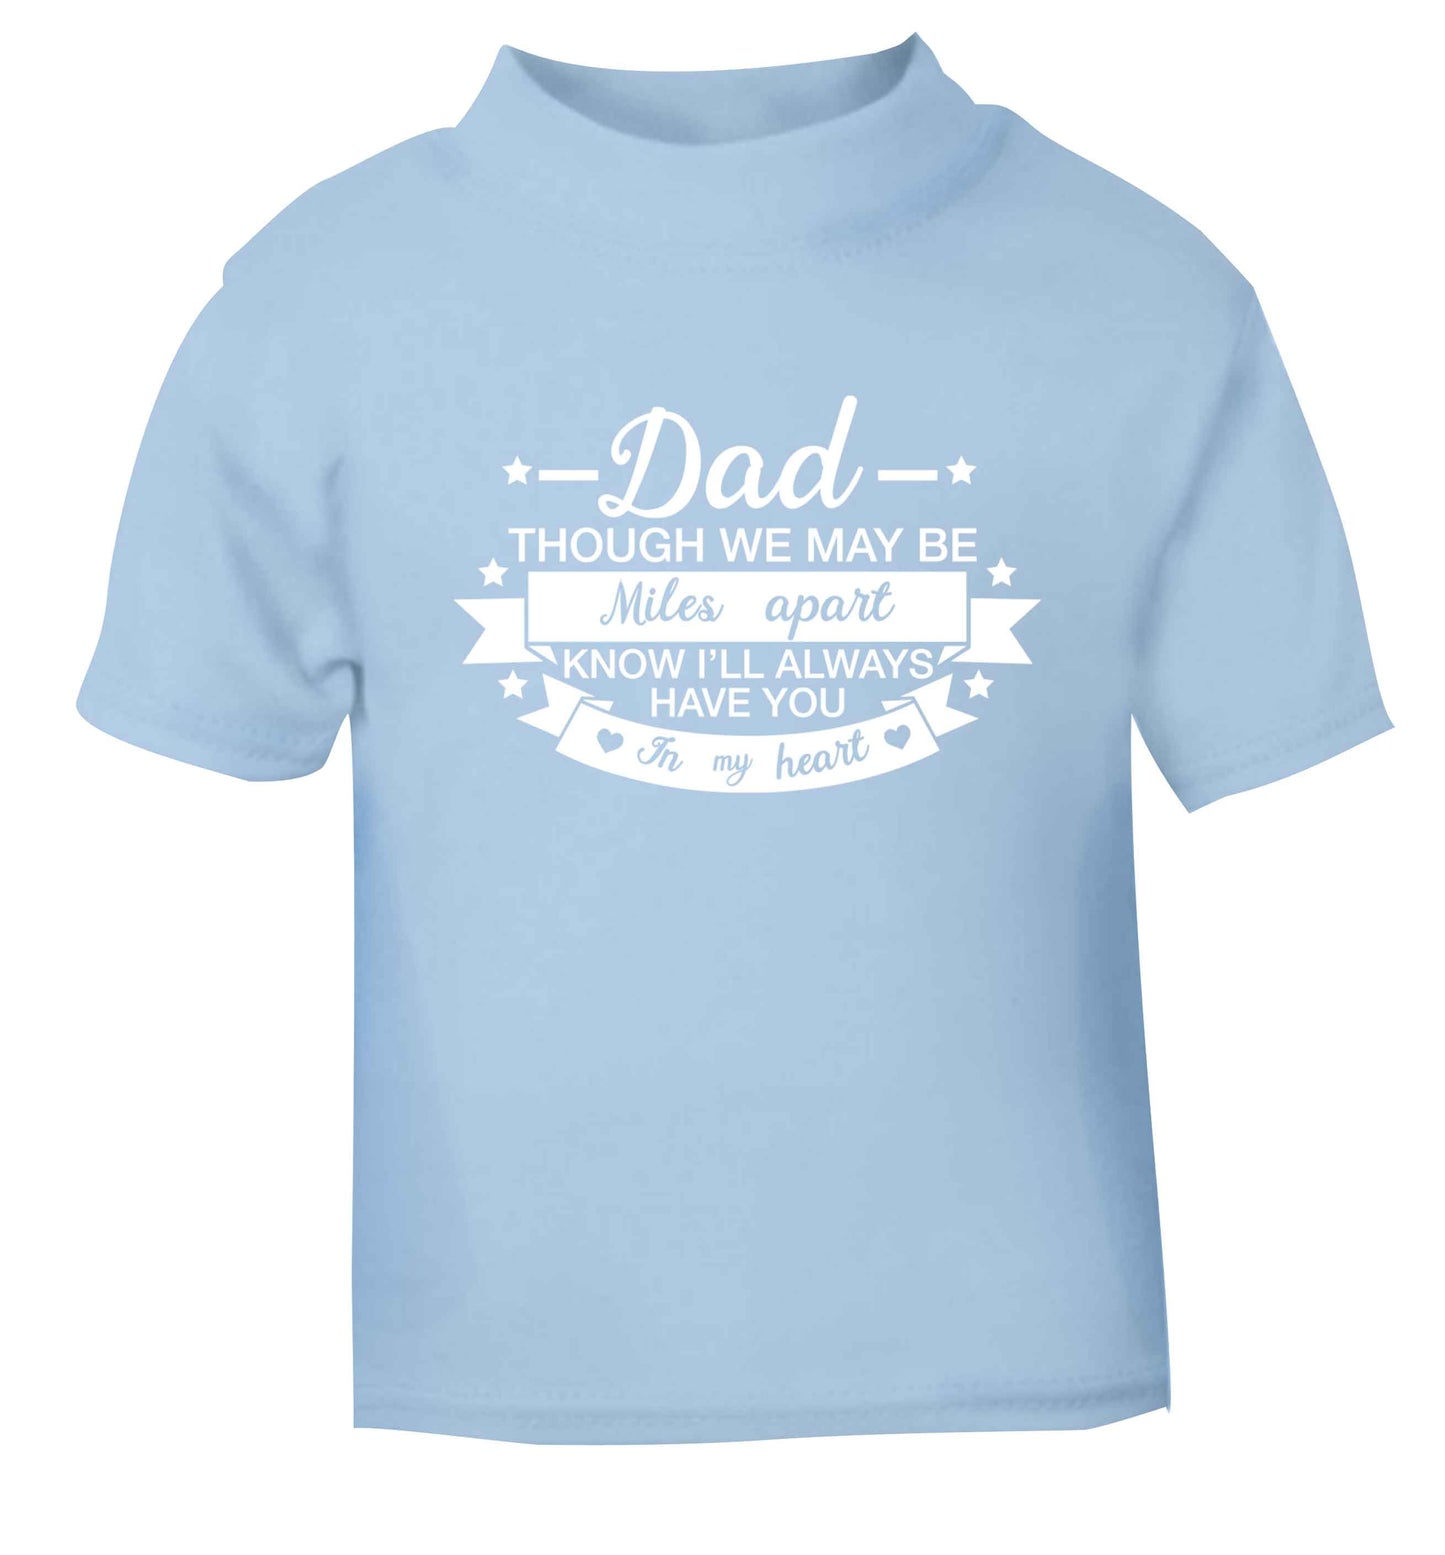 Dad though we are miles apart know I'll always have you in my heart light blue baby toddler Tshirt 2 Years